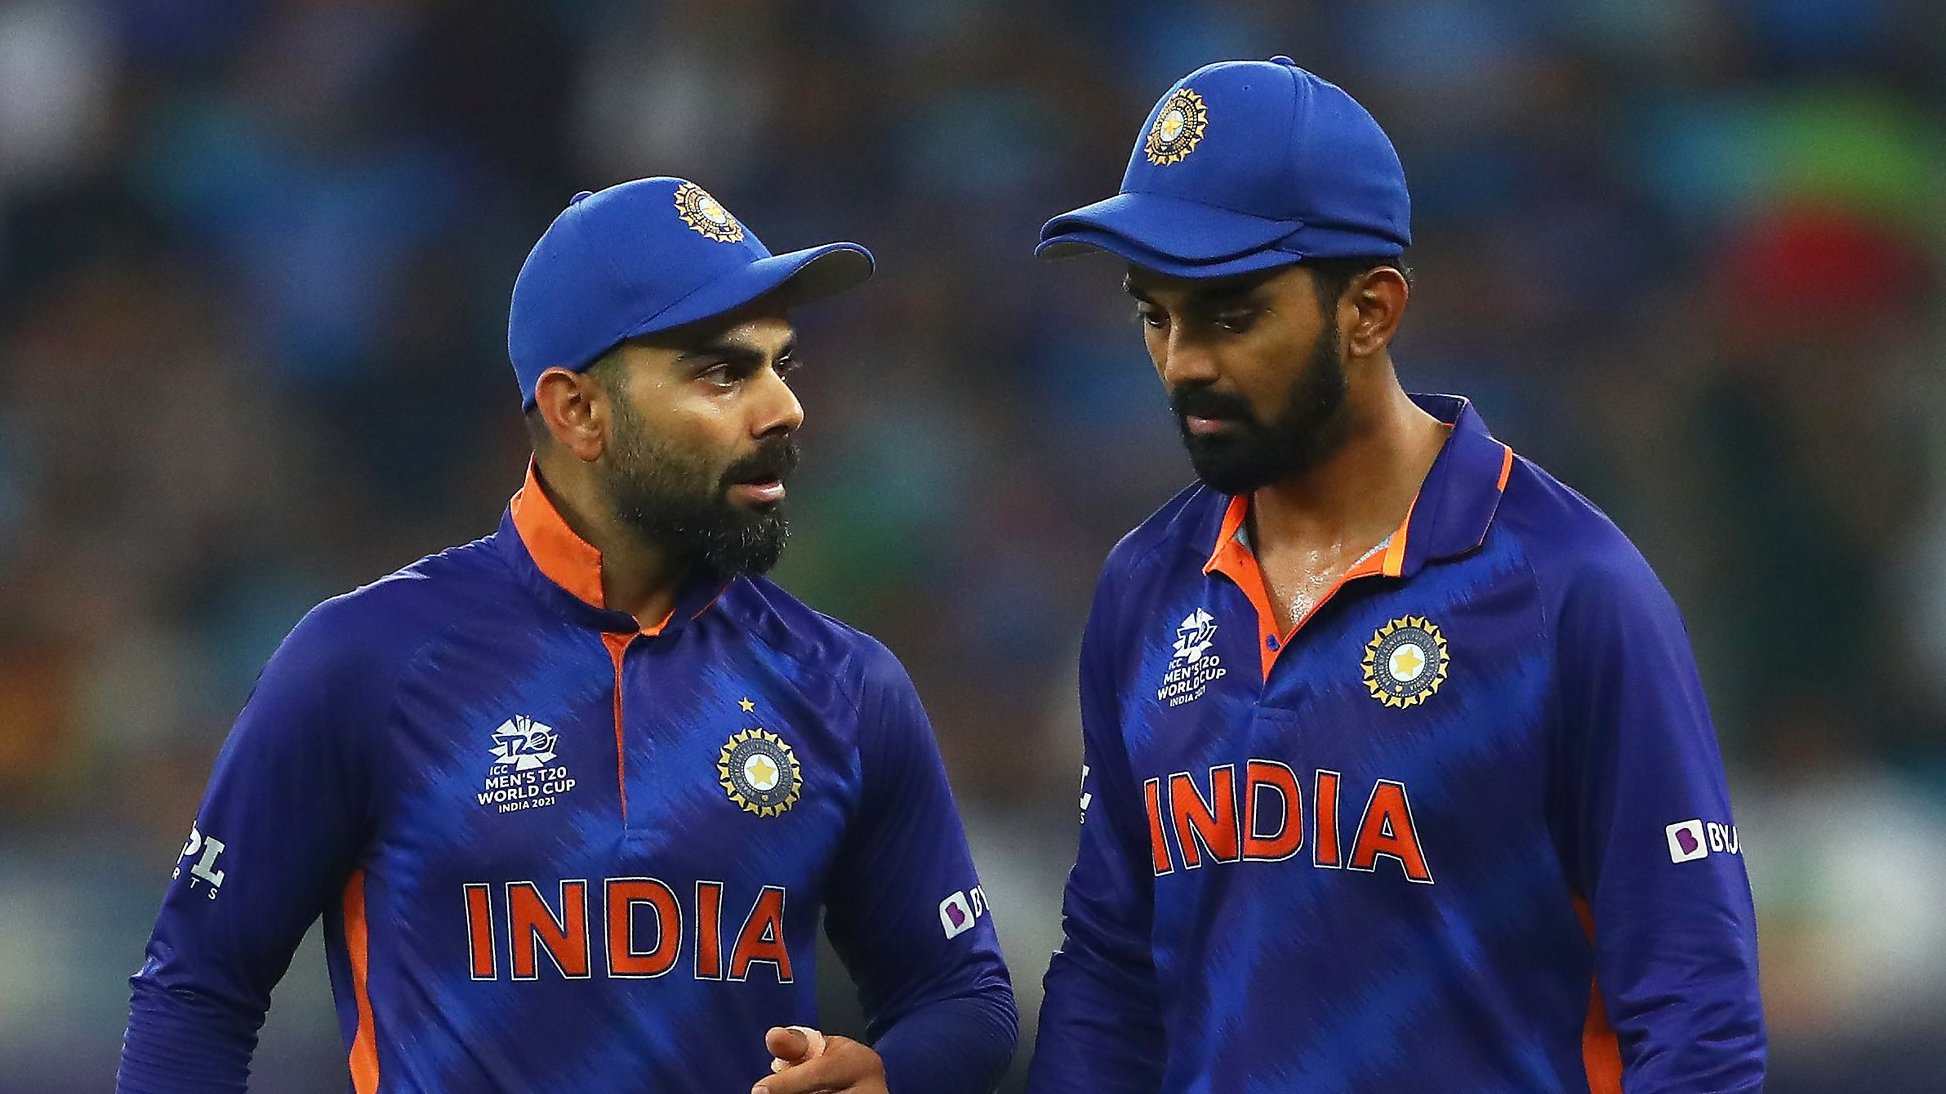 IND vs SL: KL Rahul, Virat Kohli failed, middle order collapse, duo depart in quick for powerplay; 5 reasons for India’s defeat click here